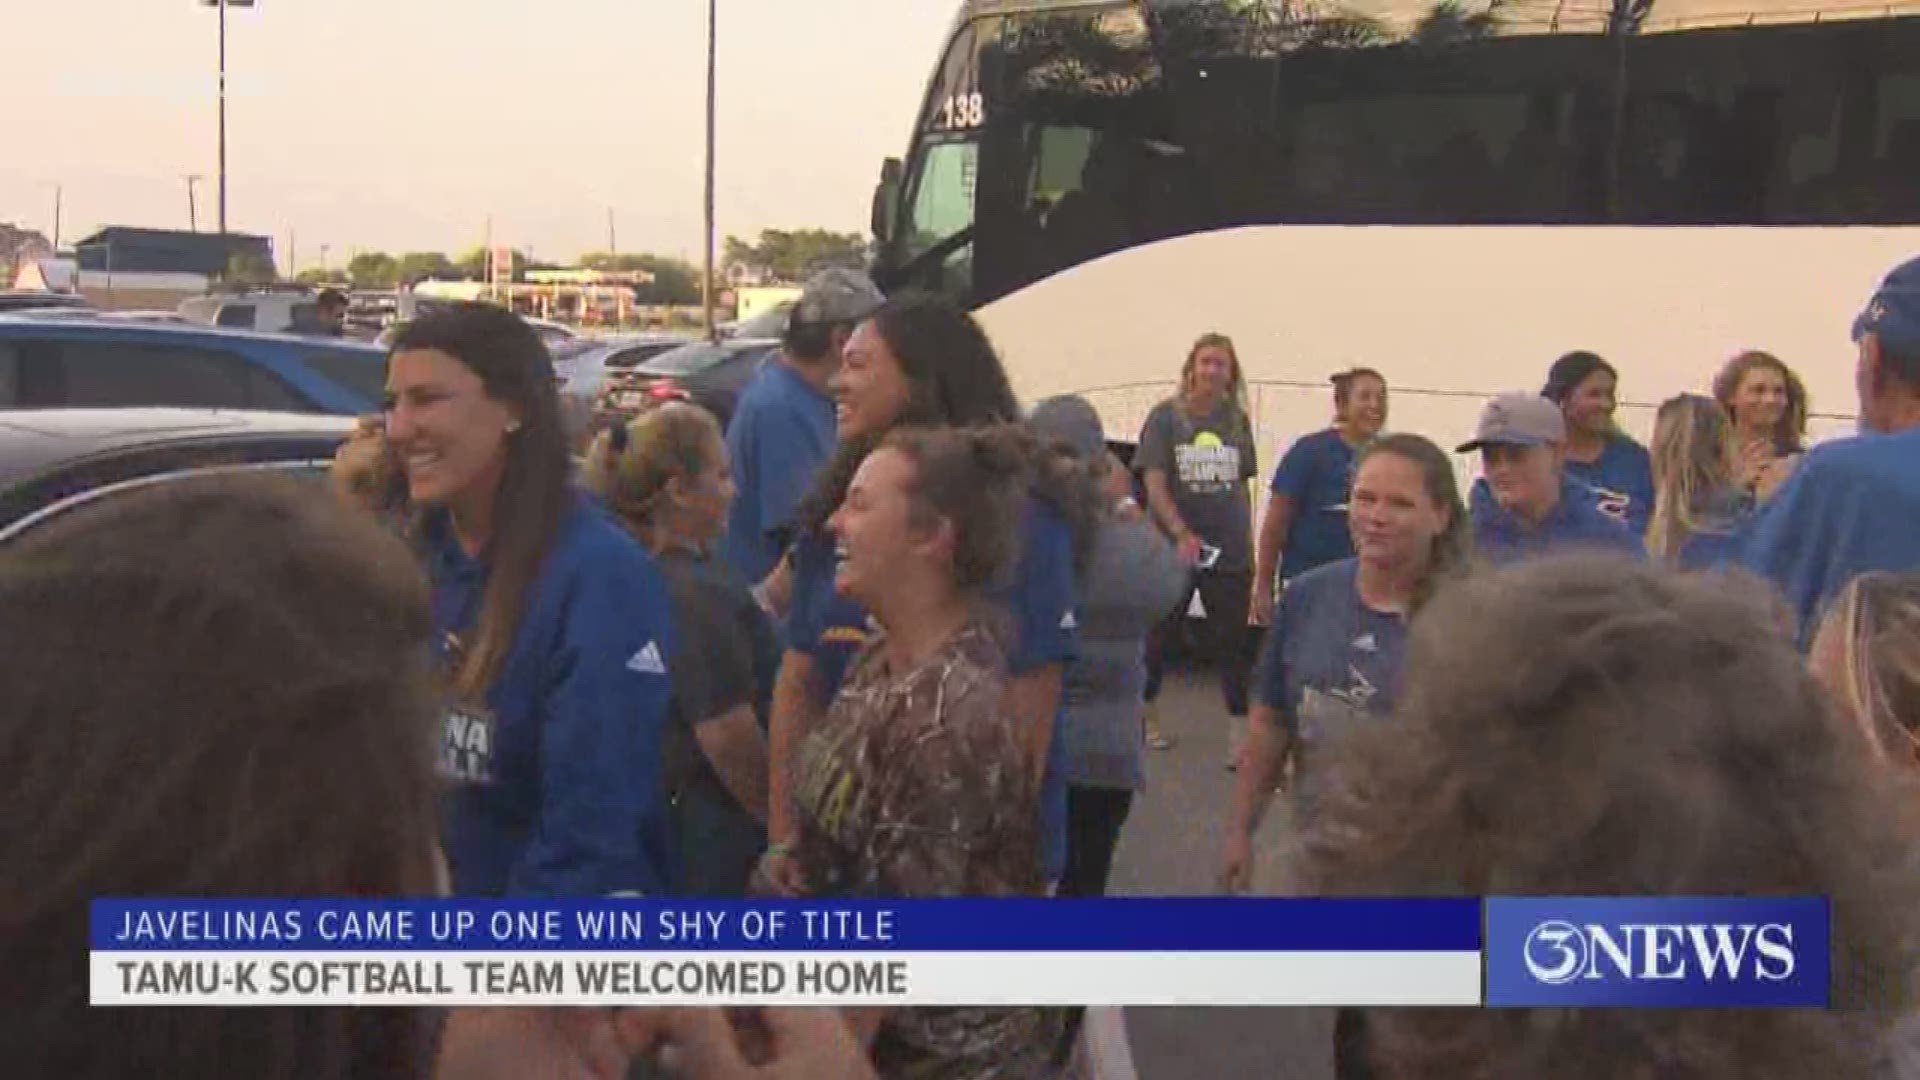 Texas A&M-Kingsville came up just short of winning the program's first national title, but still received a hero's welcome Tuesday night.